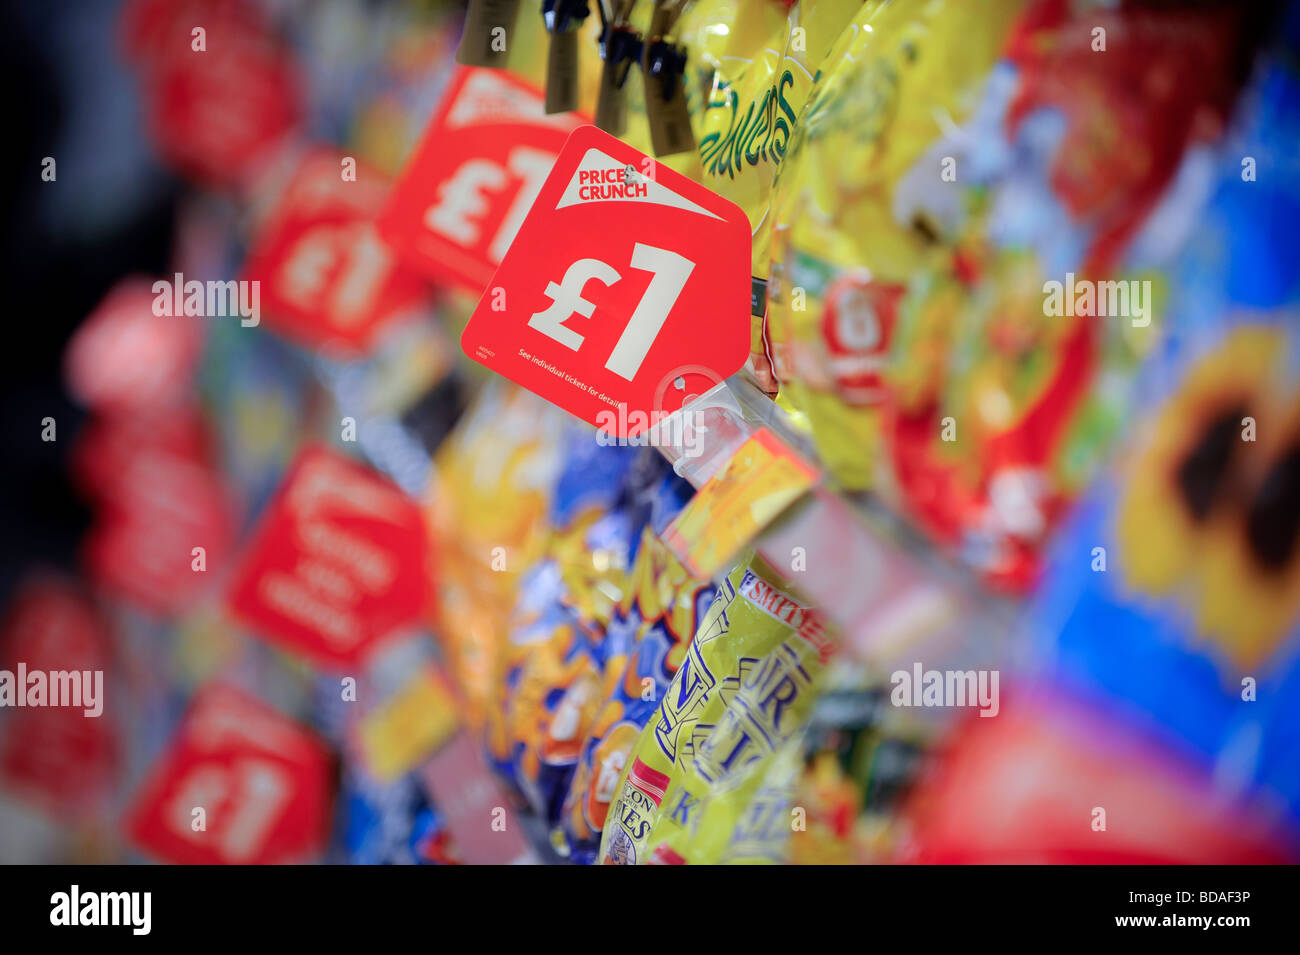 Supermarket shelves with price crunch price tags encouraging shoppers to spend. Stock Photo